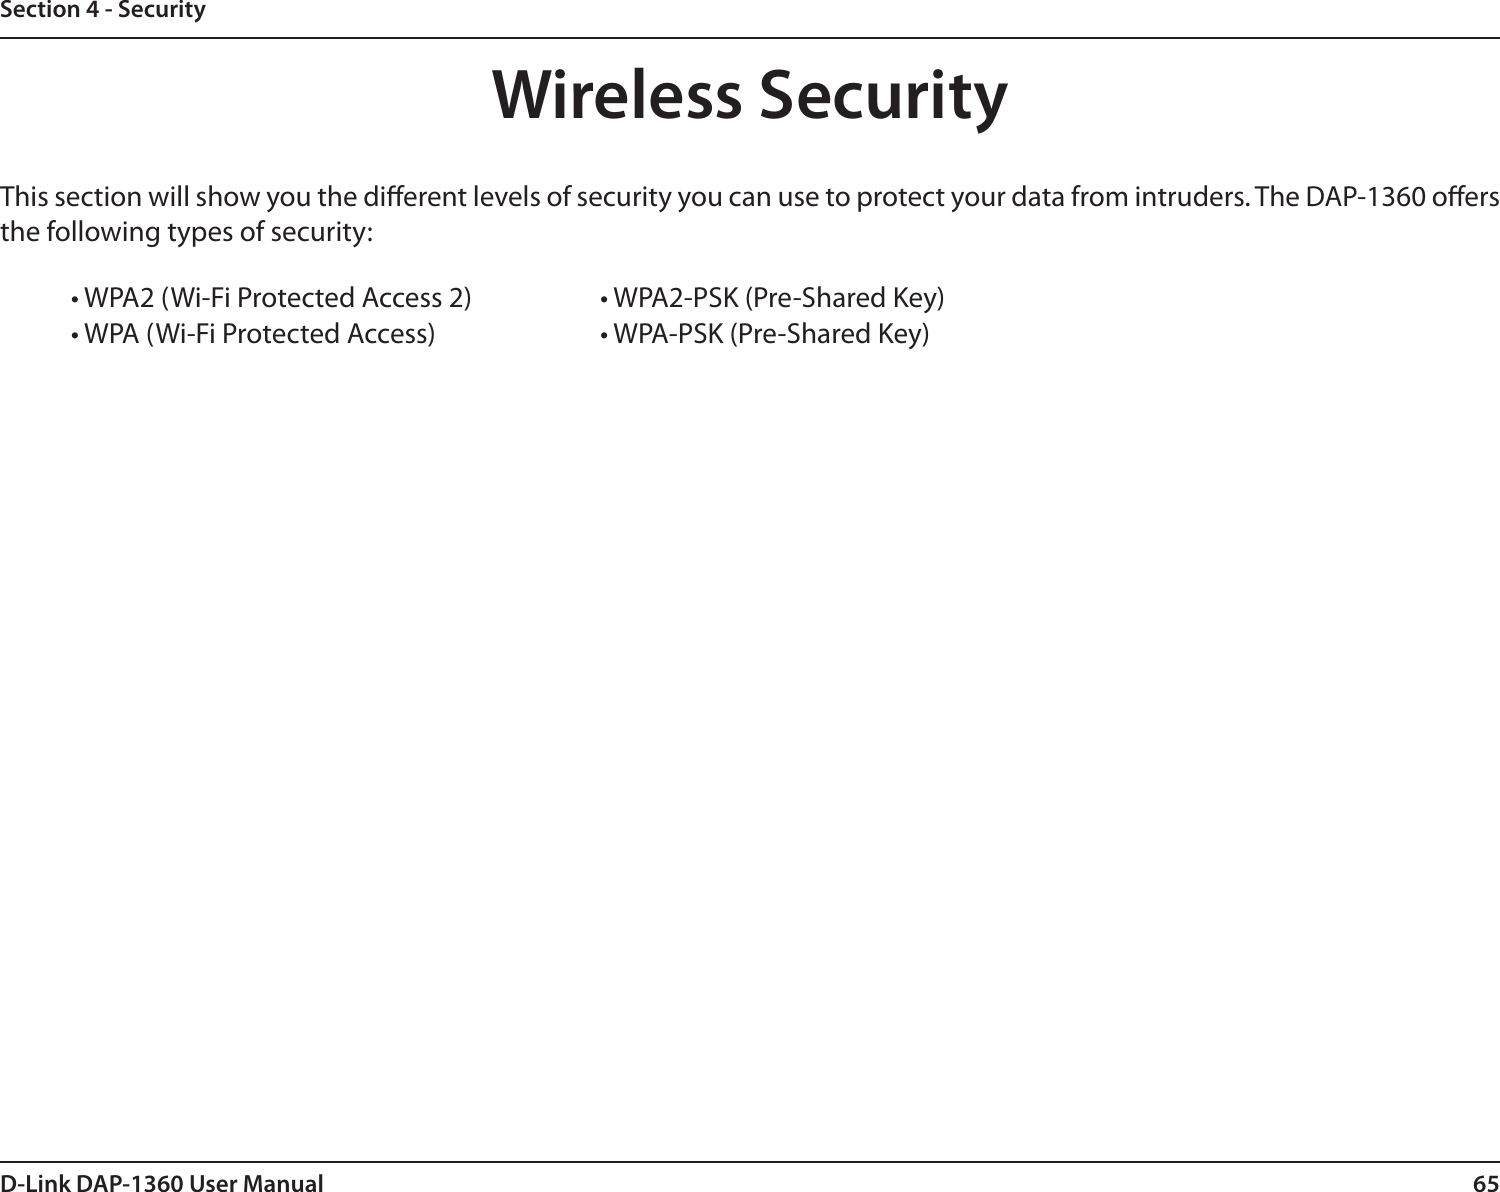 65D-Link DAP-1360 User ManualSection 4 - SecurityWireless SecurityThis section will show you the dierent levels of security you can use to protect your data from intruders. The DAP-1360 oers the following types of security:• WPA2 (Wi-Fi Protected Access 2)     • WPA2-PSK (Pre-Shared Key)• WPA (Wi-Fi Protected Access)      • WPA-PSK (Pre-Shared Key)